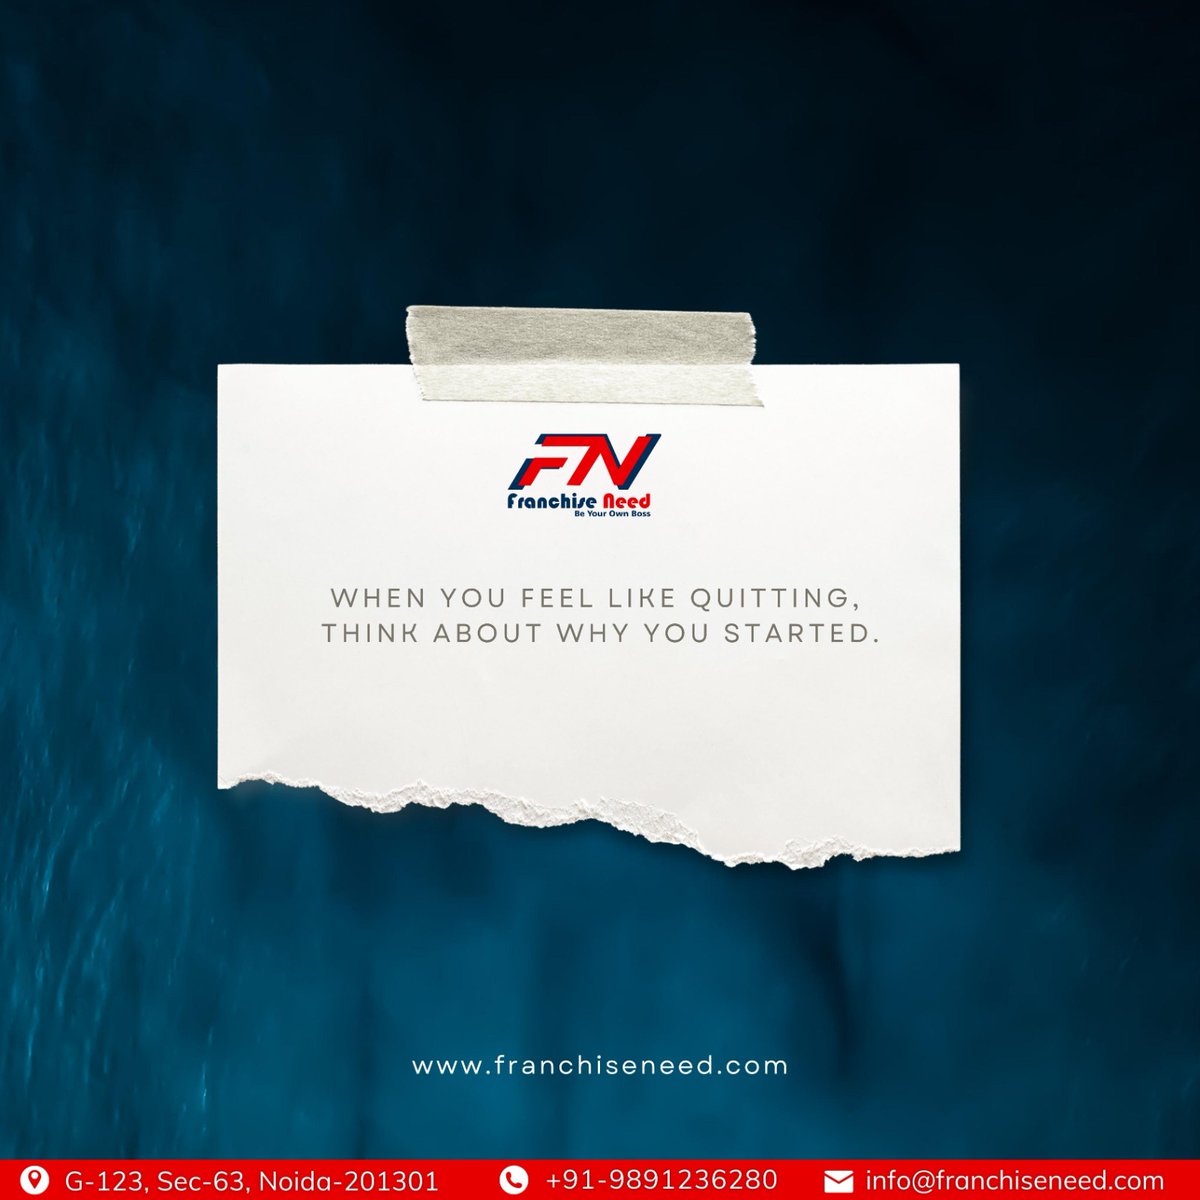 WHEN YOU FEEL LIKE QUITTING, THINK ABOUT WHY YOU STARTED.
.
📞Contact us: +91 9891236280 
.
#franchisee #franchise #franchiseopportunities #franchisebusiness #business #franchiseowner #century #entrepreneur #franchiseforsale #franchisees #franchiser  #smallbusiness  #startup